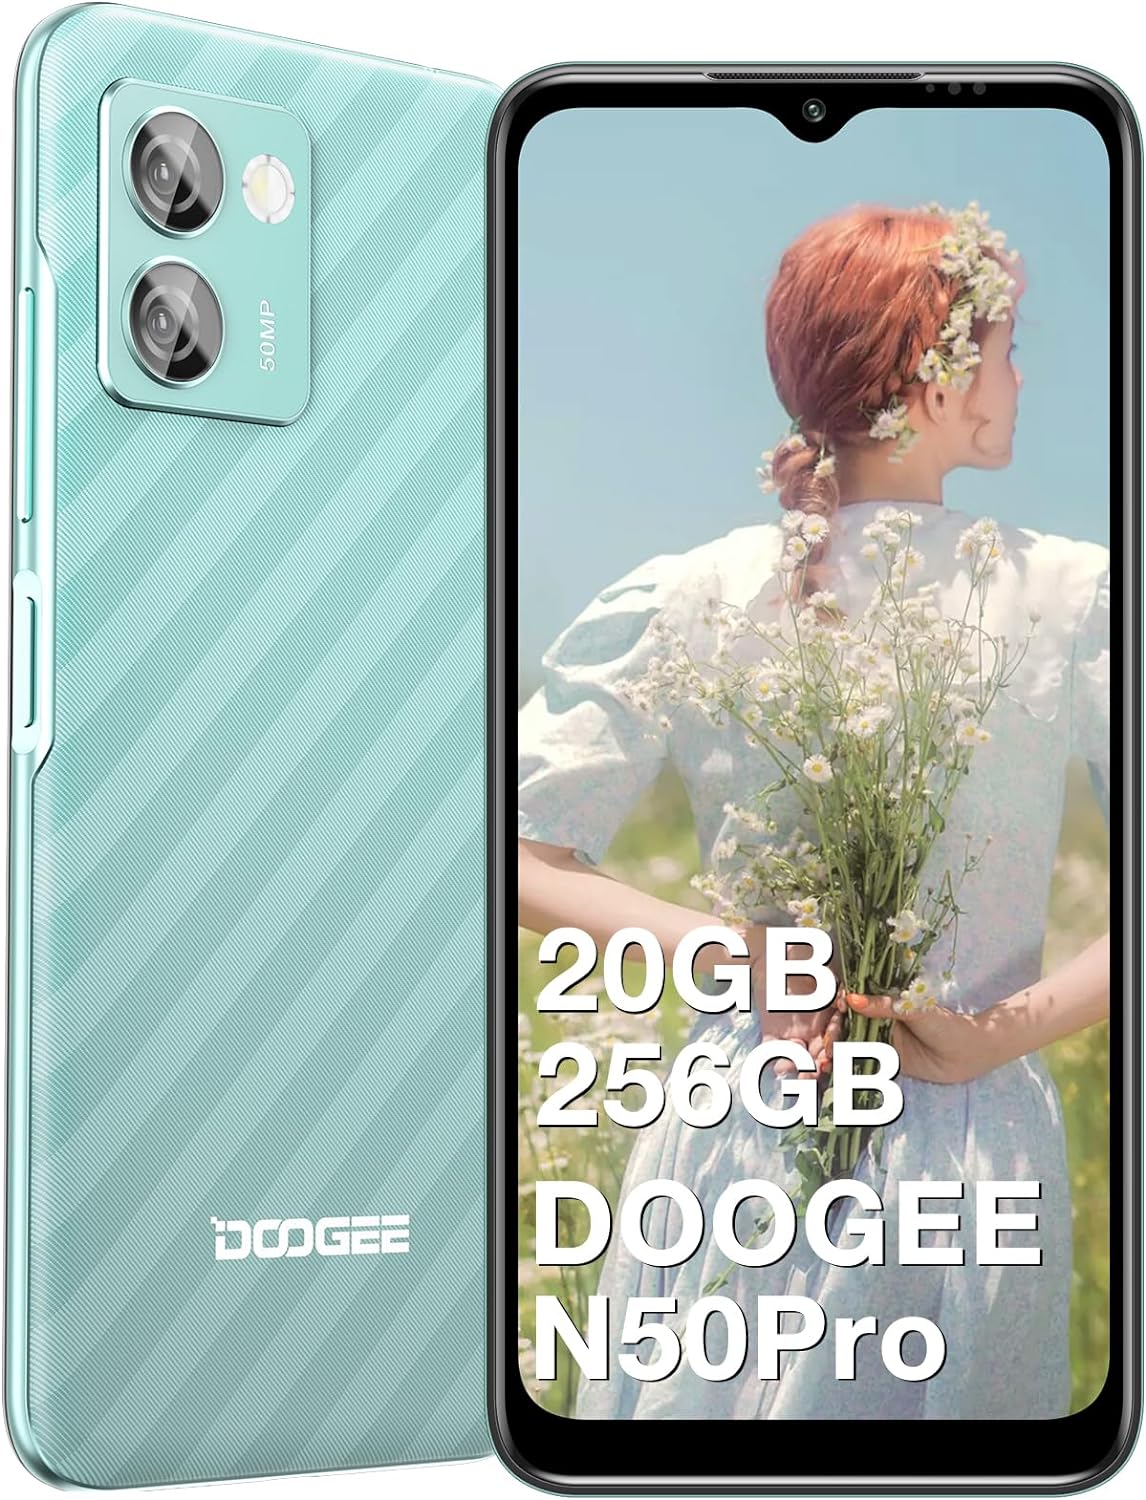 DOOGEE Android 13 Smartphone N50 Pro 6.52'' HD+, Octa Core 20GB + 256GB(Expand 1TB), 4200mAh Battery, 50MP Triple Camera, Dual SIM, Smart PA K9 Amplifier, Face Unlocked Cell Phone (Green)